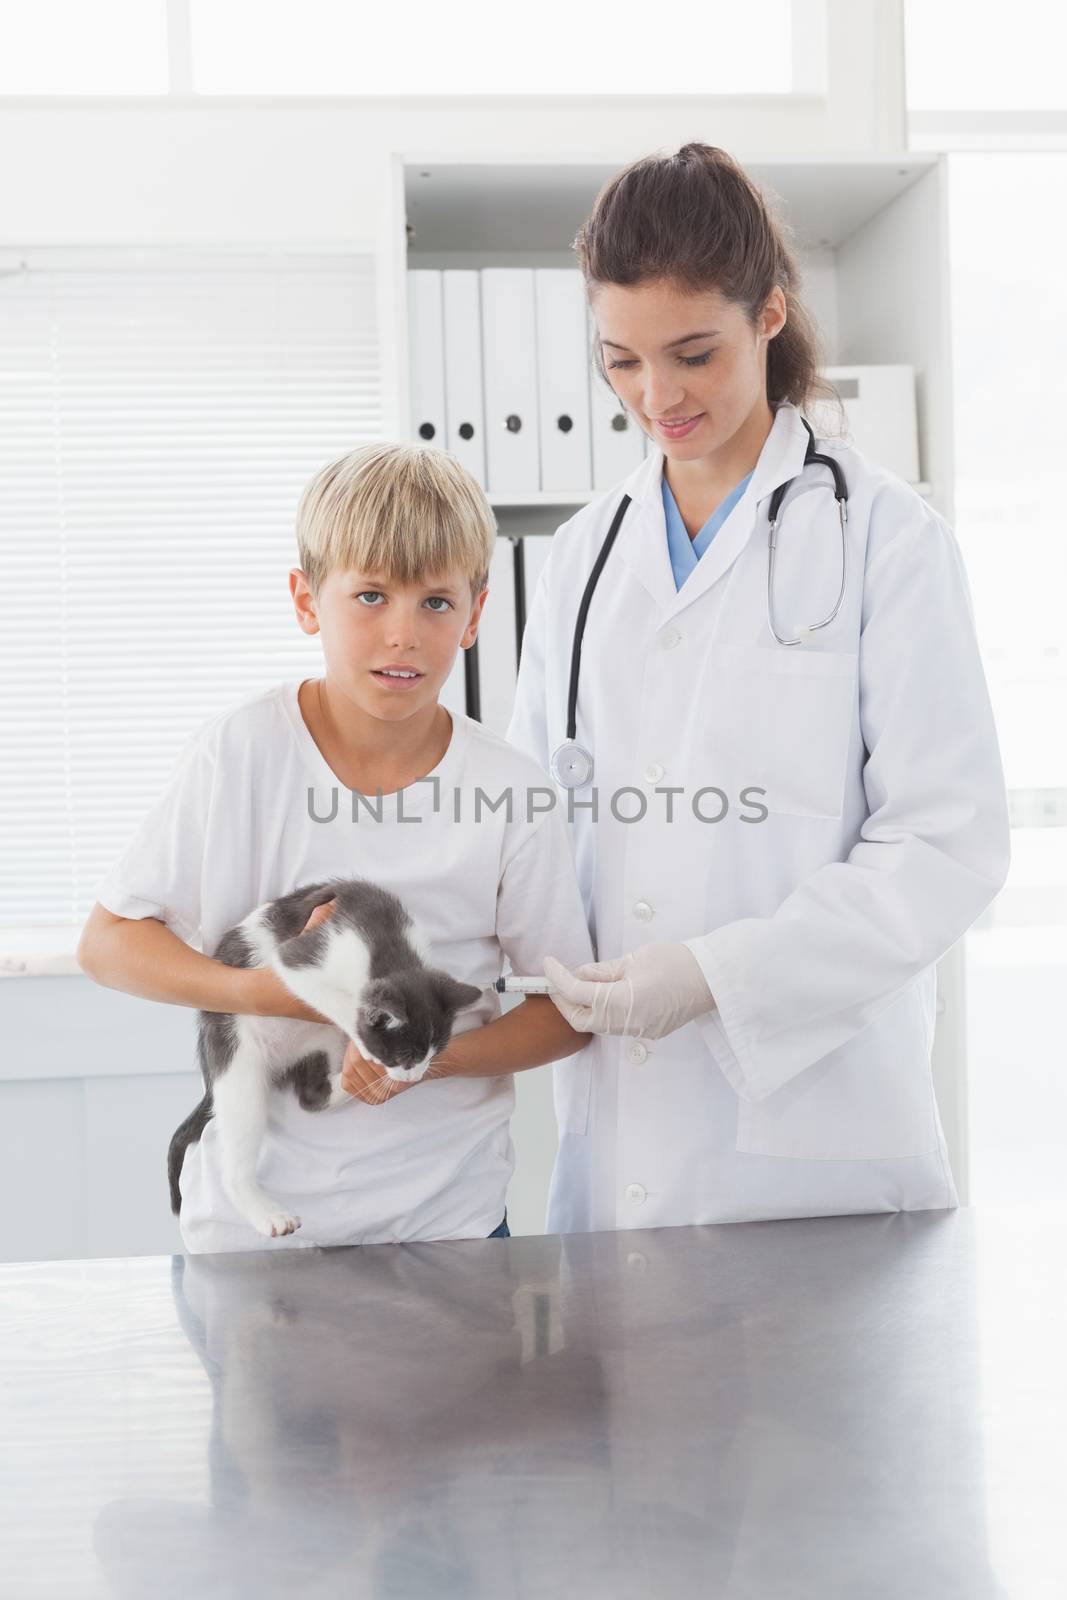 Smiling vet examining a cat with its owner  by Wavebreakmedia